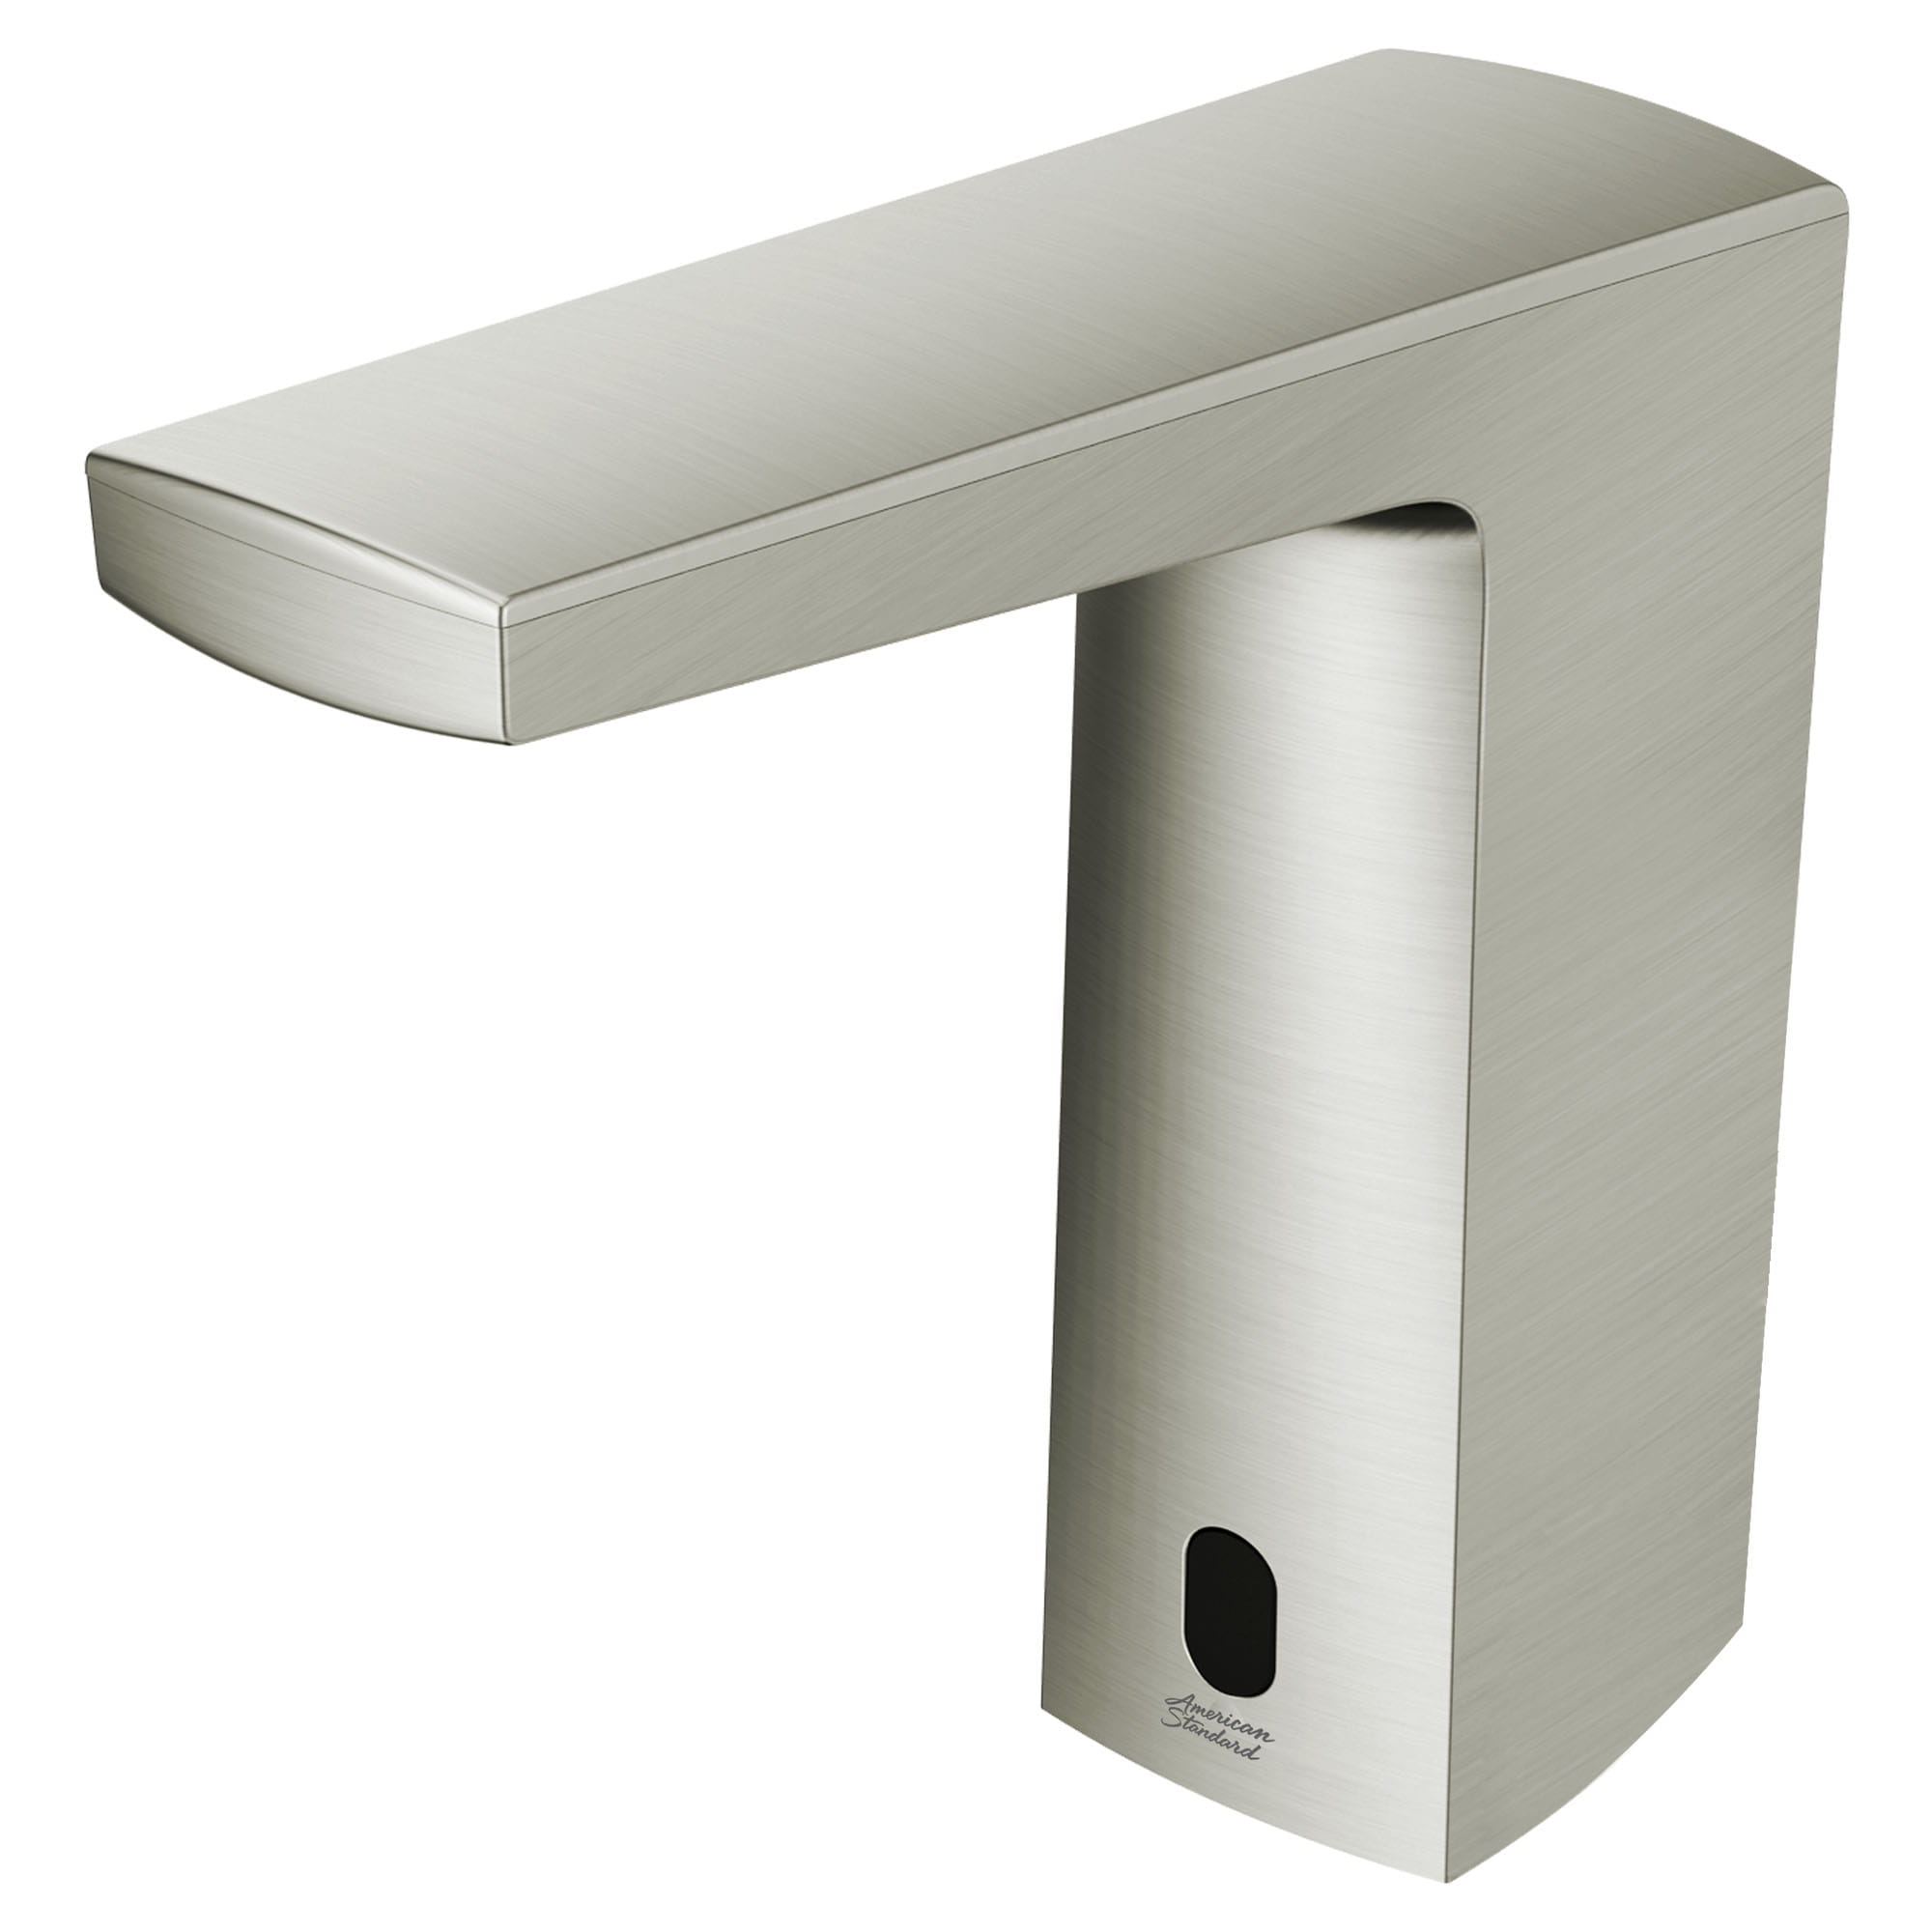 Paradigm® Selectronic® Touchless Faucet, Battery-Powered, 1.5 gpm/5.7 Lpm